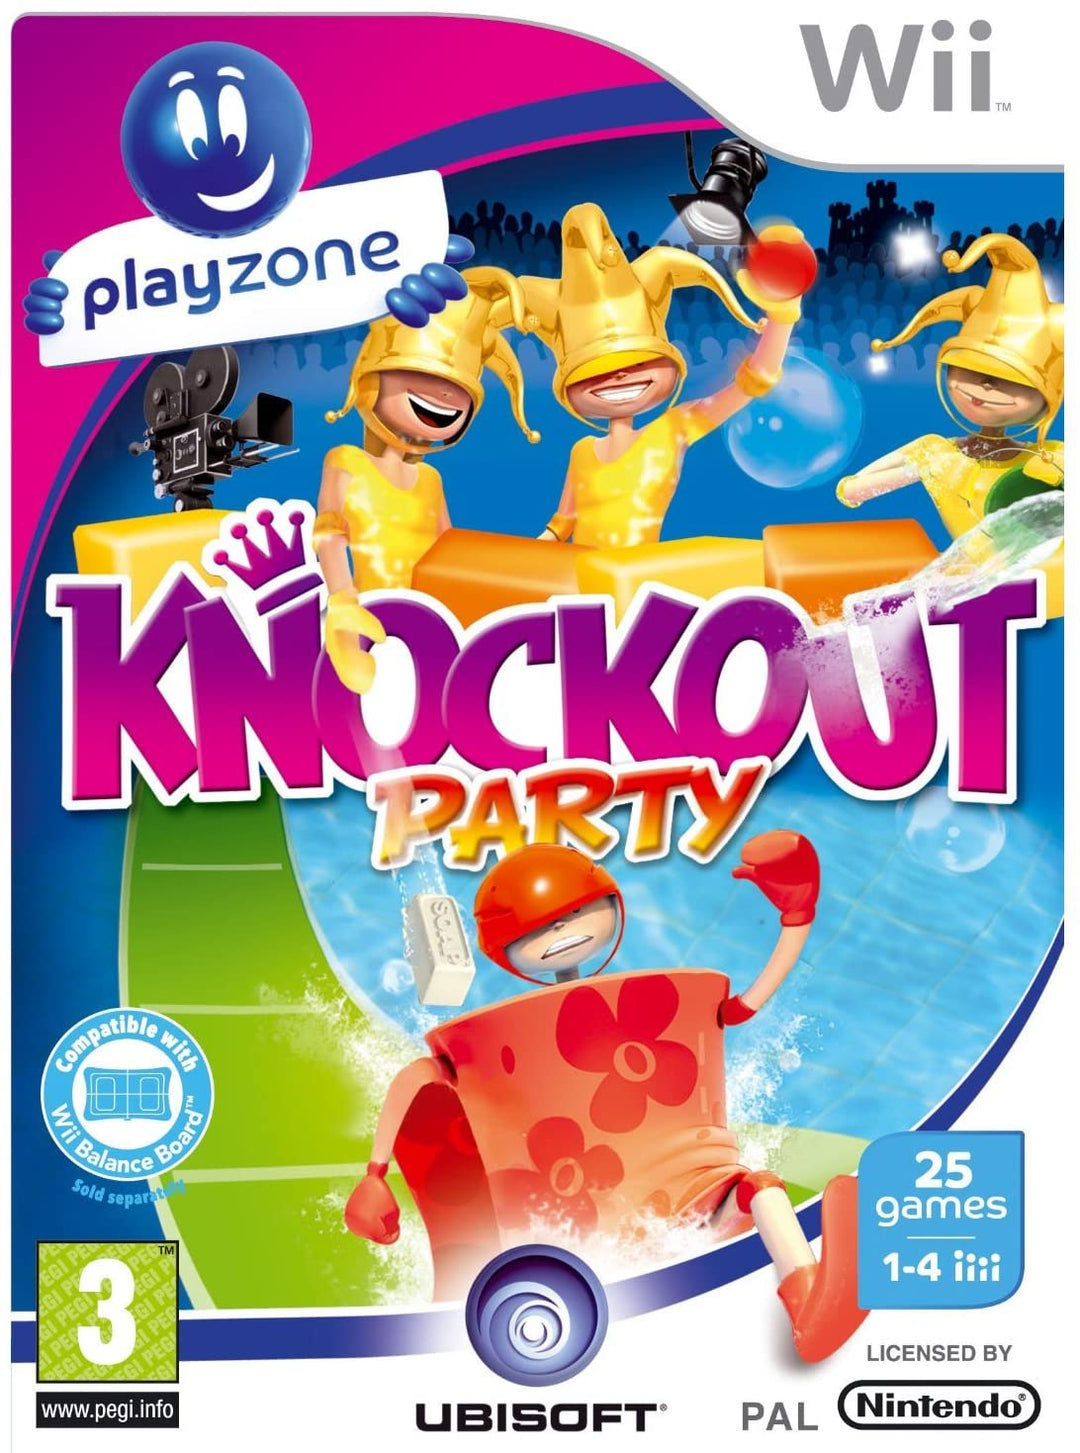 Playzone Knockout Party (Wii)